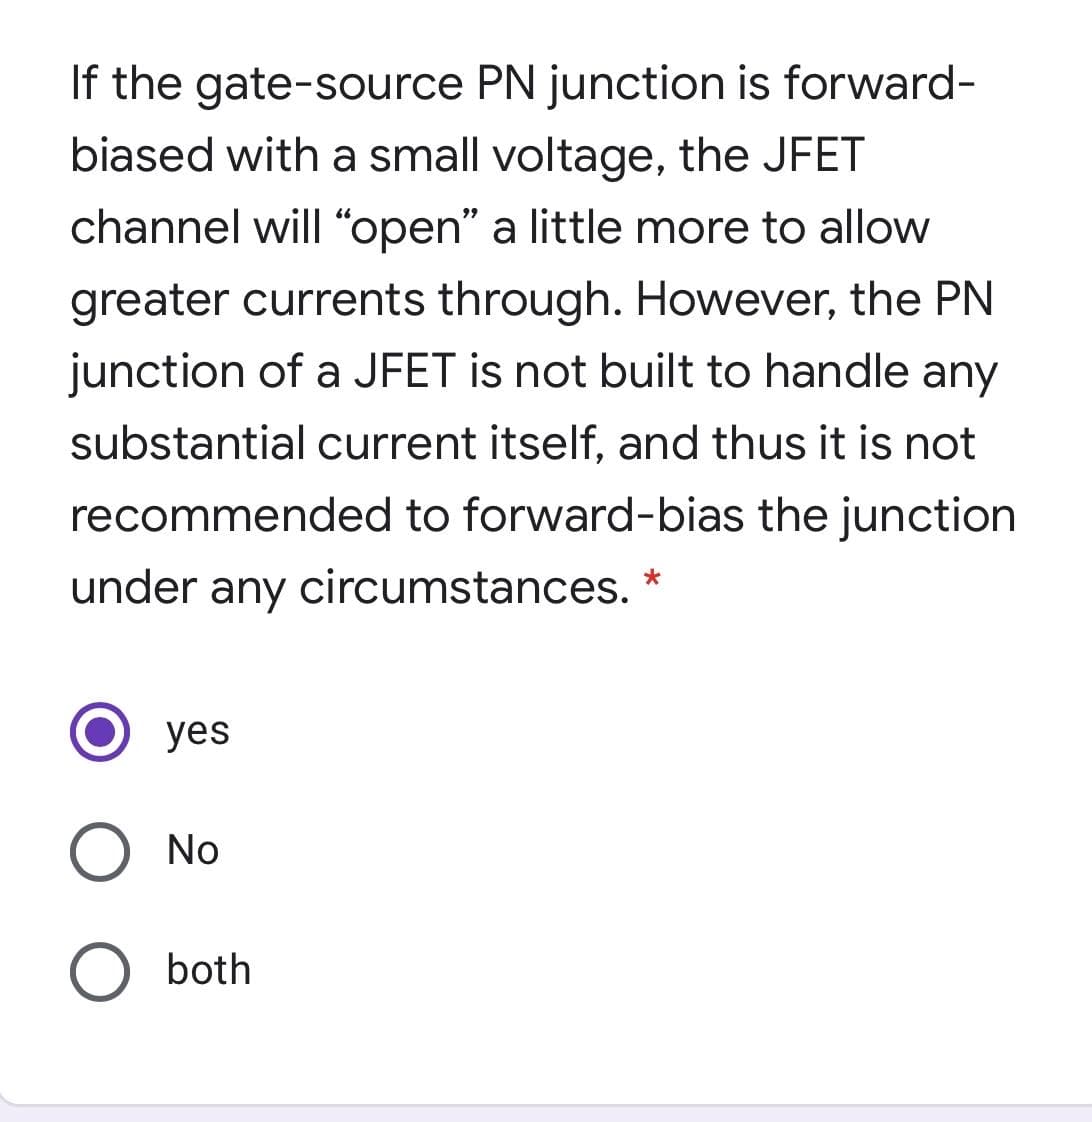 If the gate-source PN junction is forward-
biased with a small voltage, the JFET
channel will "open" a little more to allow
greater currents through. However, the PN
junction of a JFET is not built to handle any
substantial current itself, and thus it is not
recommended to forward-bias the junction
under any circumstances.
yes
No
both
